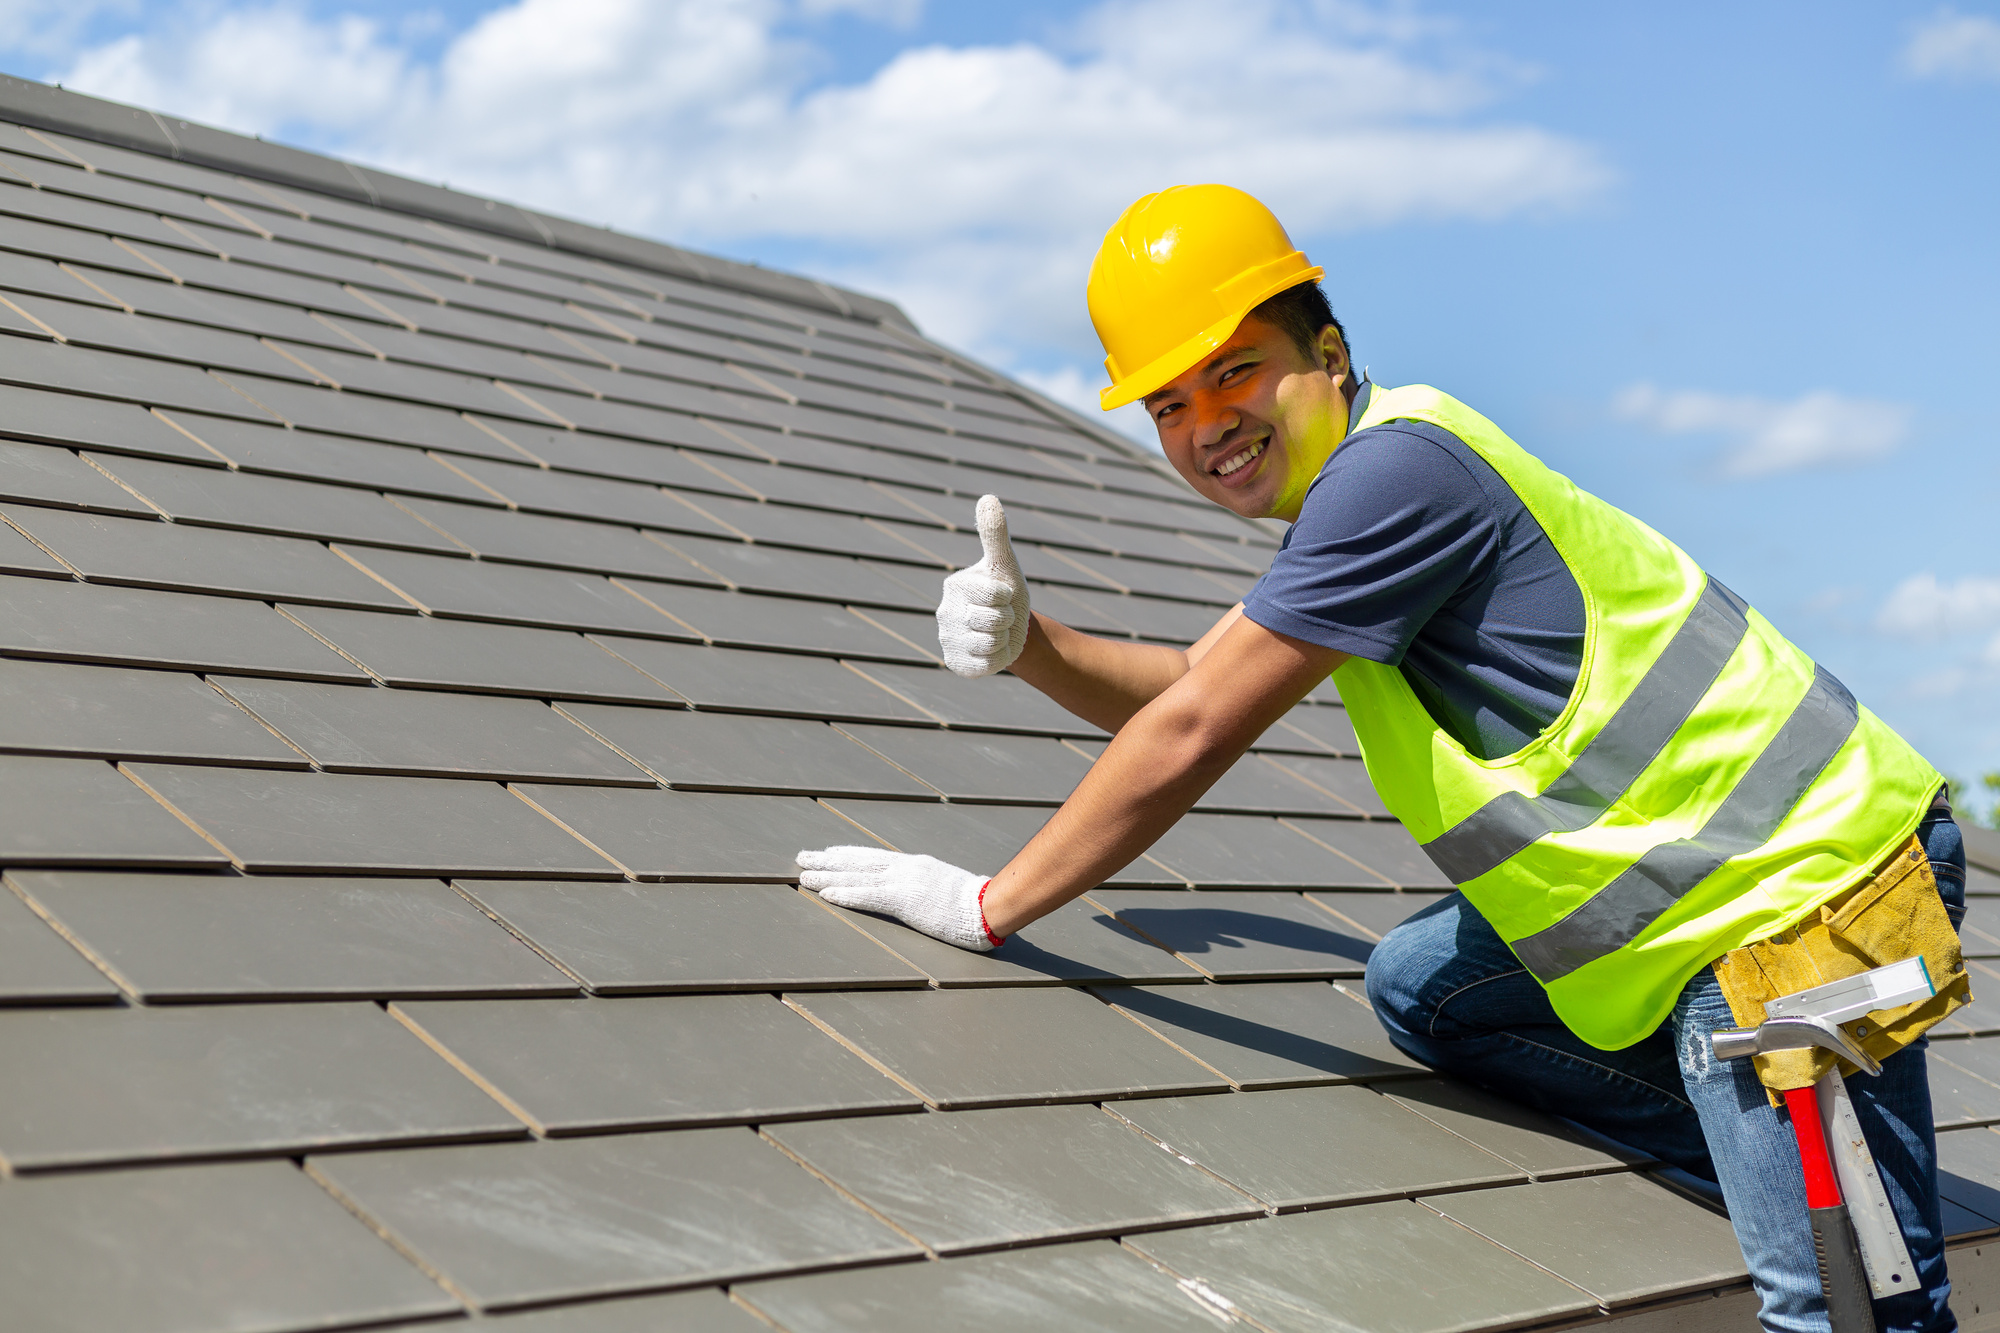 Finding the right professional for a roofing project requires knowing your options. Here is what to know about how to select residential roofing contractors.